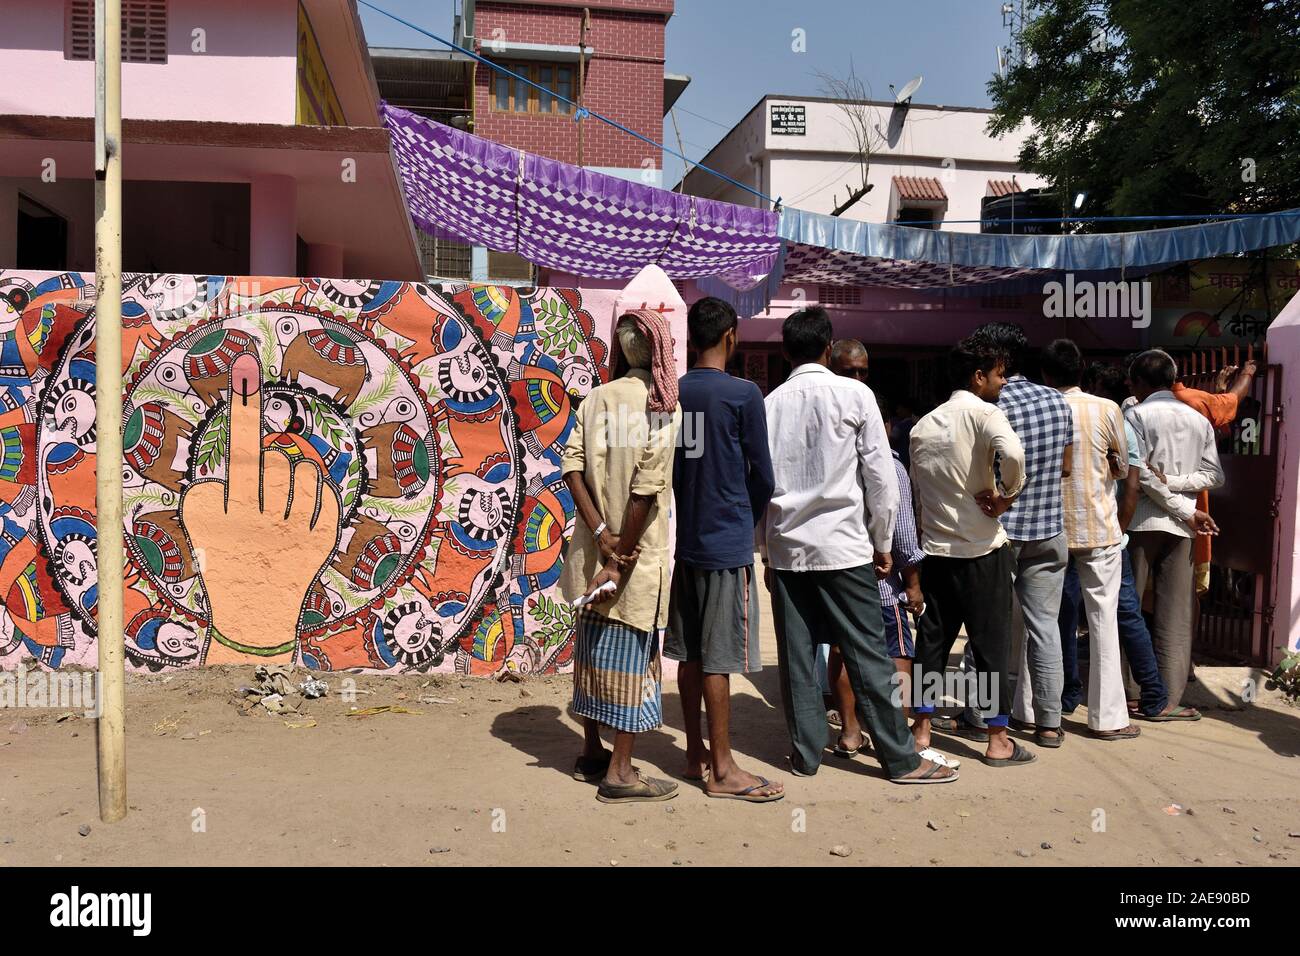 People waiting to cast their votes outside a polling station in Patna, India for the general elections held in May 2019. Stock Photo